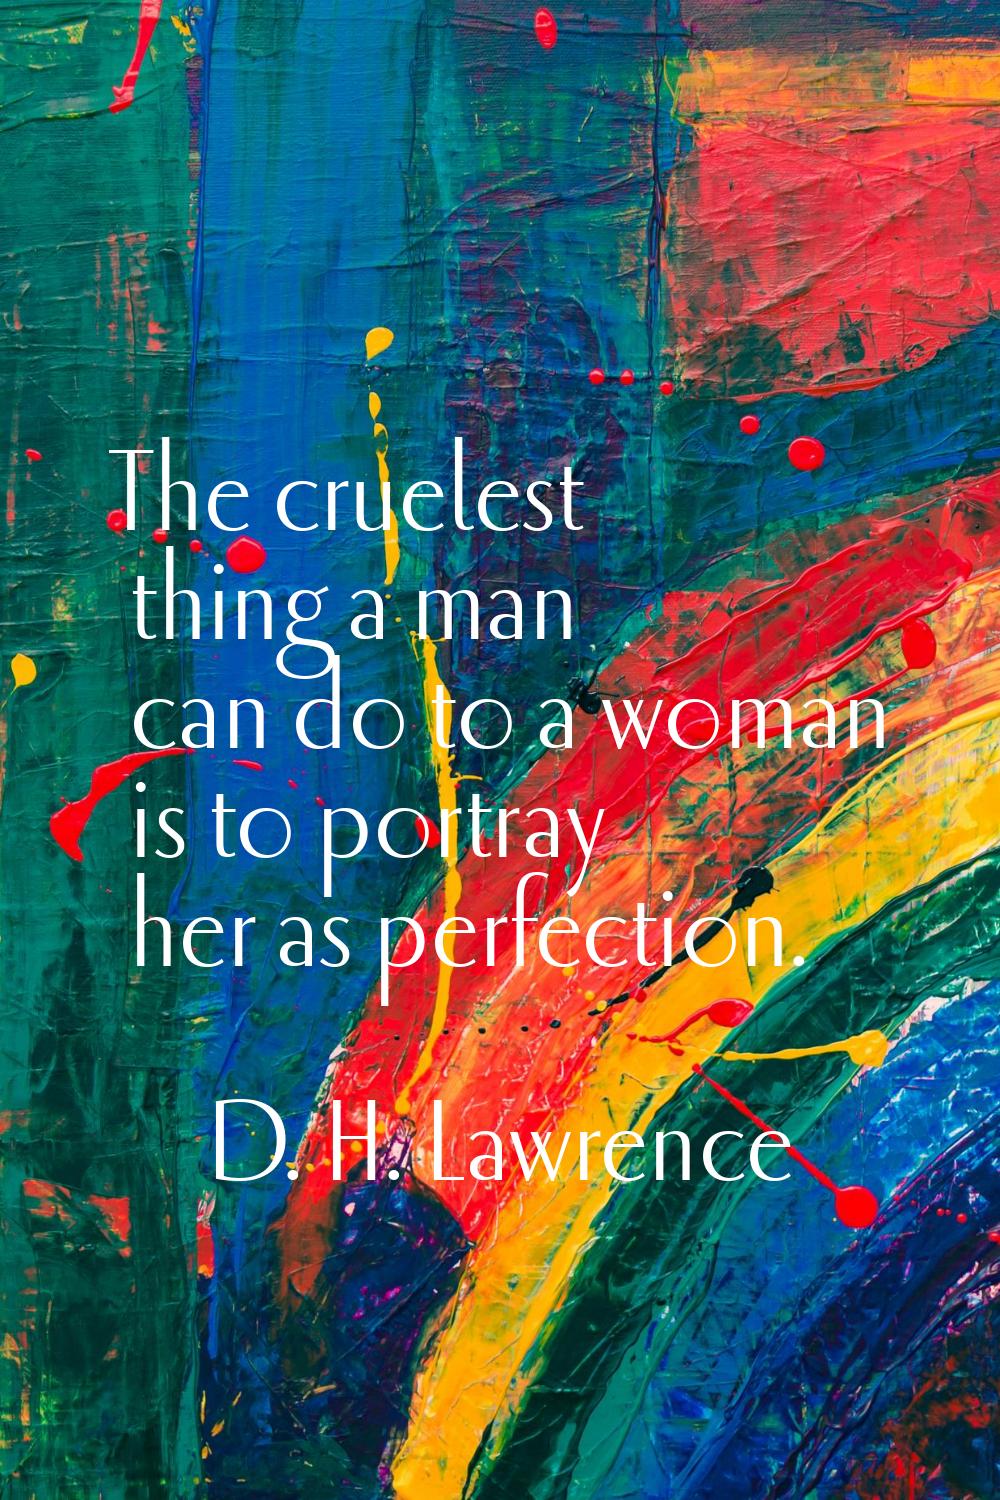 The cruelest thing a man can do to a woman is to portray her as perfection.